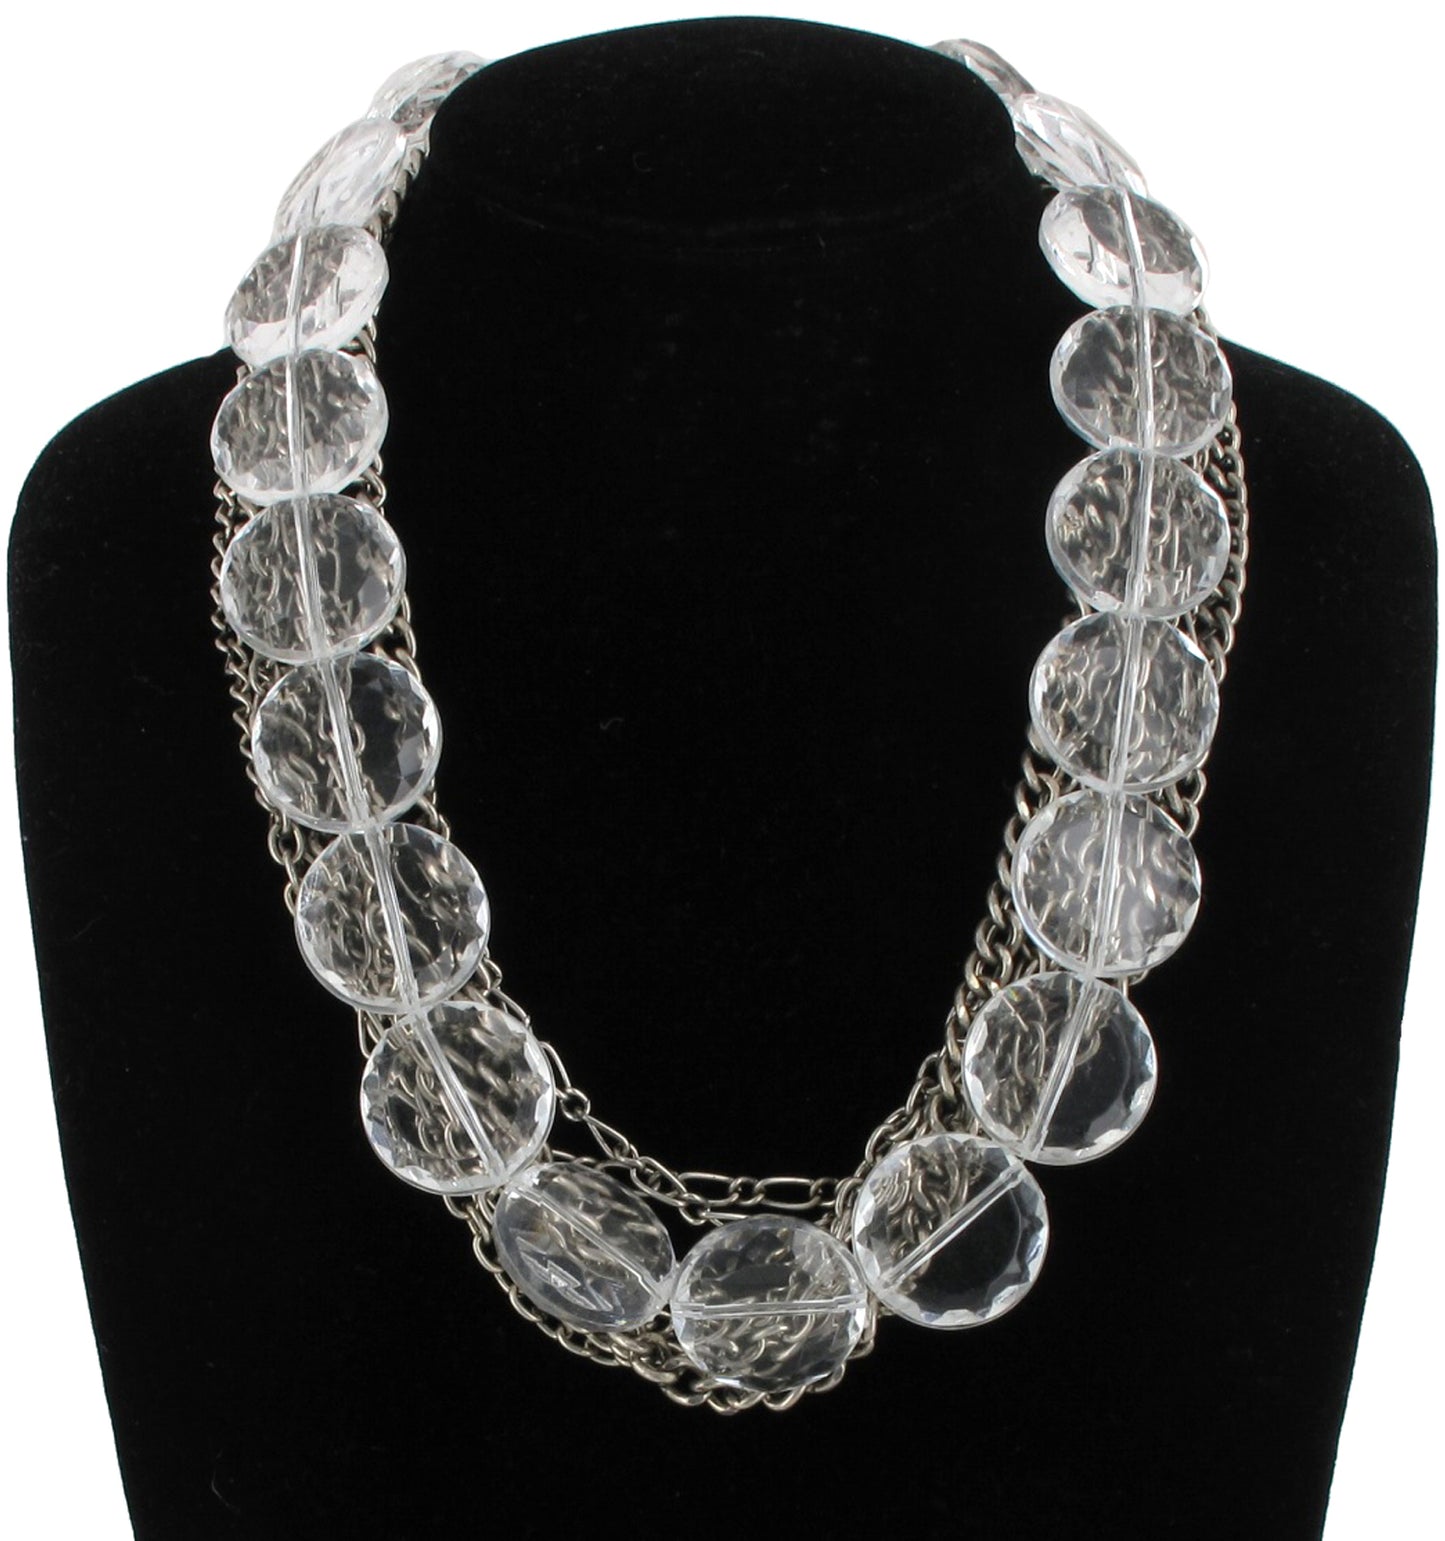 Clear Faceted Beads Multistrand Silver Tone Chain Necklace 20-23"